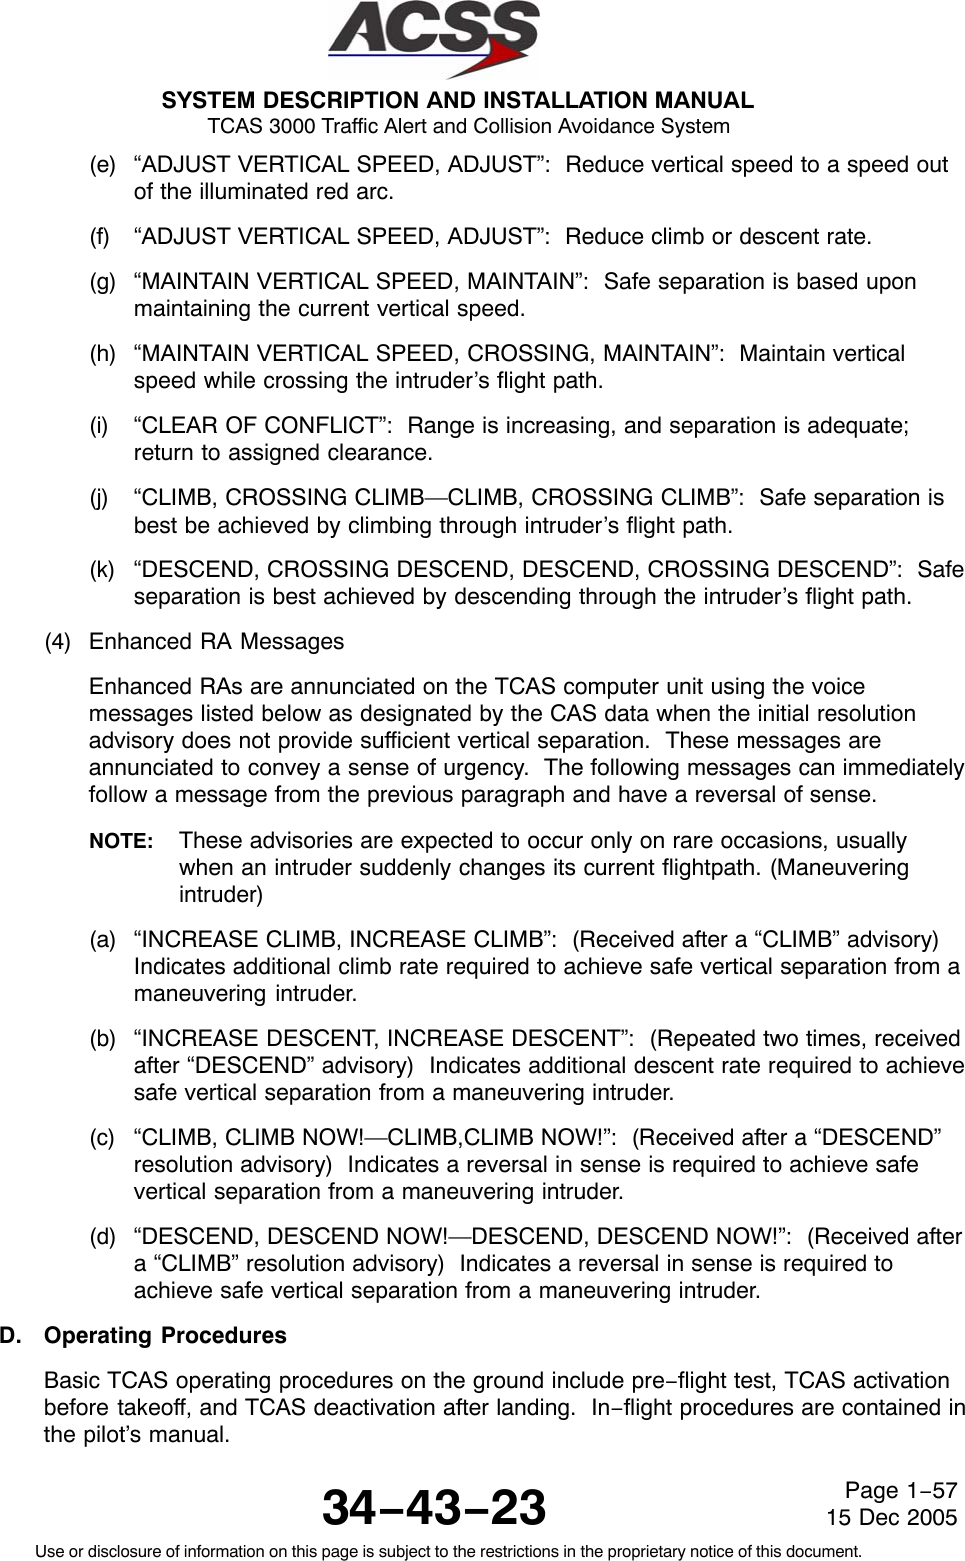 SYSTEM DESCRIPTION AND INSTALLATION MANUAL TCAS 3000 Traffic Alert and Collision Avoidance System34−43−23Use or disclosure of information on this page is subject to the restrictions in the proprietary notice of this document.Page 1−5715 Dec 2005(e) “ADJUST VERTICAL SPEED, ADJUST”:  Reduce vertical speed to a speed outof the illuminated red arc.(f) “ADJUST VERTICAL SPEED, ADJUST”:  Reduce climb or descent rate.(g) “MAINTAIN VERTICAL SPEED, MAINTAIN”:  Safe separation is based uponmaintaining the current vertical speed.(h) “MAINTAIN VERTICAL SPEED, CROSSING, MAINTAIN”:  Maintain verticalspeed while crossing the intruder’s flight path.(i) “CLEAR OF CONFLICT”:  Range is increasing, and separation is adequate;return to assigned clearance.(j) “CLIMB, CROSSING CLIMB—CLIMB, CROSSING CLIMB”:  Safe separation isbest be achieved by climbing through intruder’s flight path.(k) “DESCEND, CROSSING DESCEND, DESCEND, CROSSING DESCEND”:  Safeseparation is best achieved by descending through the intruder’s flight path.(4) Enhanced RA MessagesEnhanced RAs are annunciated on the TCAS computer unit using the voicemessages listed below as designated by the CAS data when the initial resolutionadvisory does not provide sufficient vertical separation.  These messages areannunciated to convey a sense of urgency.  The following messages can immediatelyfollow a message from the previous paragraph and have a reversal of sense.NOTE: These advisories are expected to occur only on rare occasions, usuallywhen an intruder suddenly changes its current flightpath. (Maneuveringintruder)(a) “INCREASE CLIMB, INCREASE CLIMB”:  (Received after a “CLIMB” advisory)Indicates additional climb rate required to achieve safe vertical separation from amaneuvering intruder.(b) “INCREASE DESCENT, INCREASE DESCENT”:  (Repeated two times, receivedafter “DESCEND” advisory)  Indicates additional descent rate required to achievesafe vertical separation from a maneuvering intruder.(c) “CLIMB, CLIMB NOW!—CLIMB,CLIMB NOW!”:  (Received after a “DESCEND”resolution advisory)  Indicates a reversal in sense is required to achieve safevertical separation from a maneuvering intruder.(d) “DESCEND, DESCEND NOW!—DESCEND, DESCEND NOW!”:  (Received aftera “CLIMB” resolution advisory)  Indicates a reversal in sense is required toachieve safe vertical separation from a maneuvering intruder.D. Operating ProceduresBasic TCAS operating procedures on the ground include pre−flight test, TCAS activationbefore takeoff, and TCAS deactivation after landing.  In−flight procedures are contained inthe pilot’s manual.